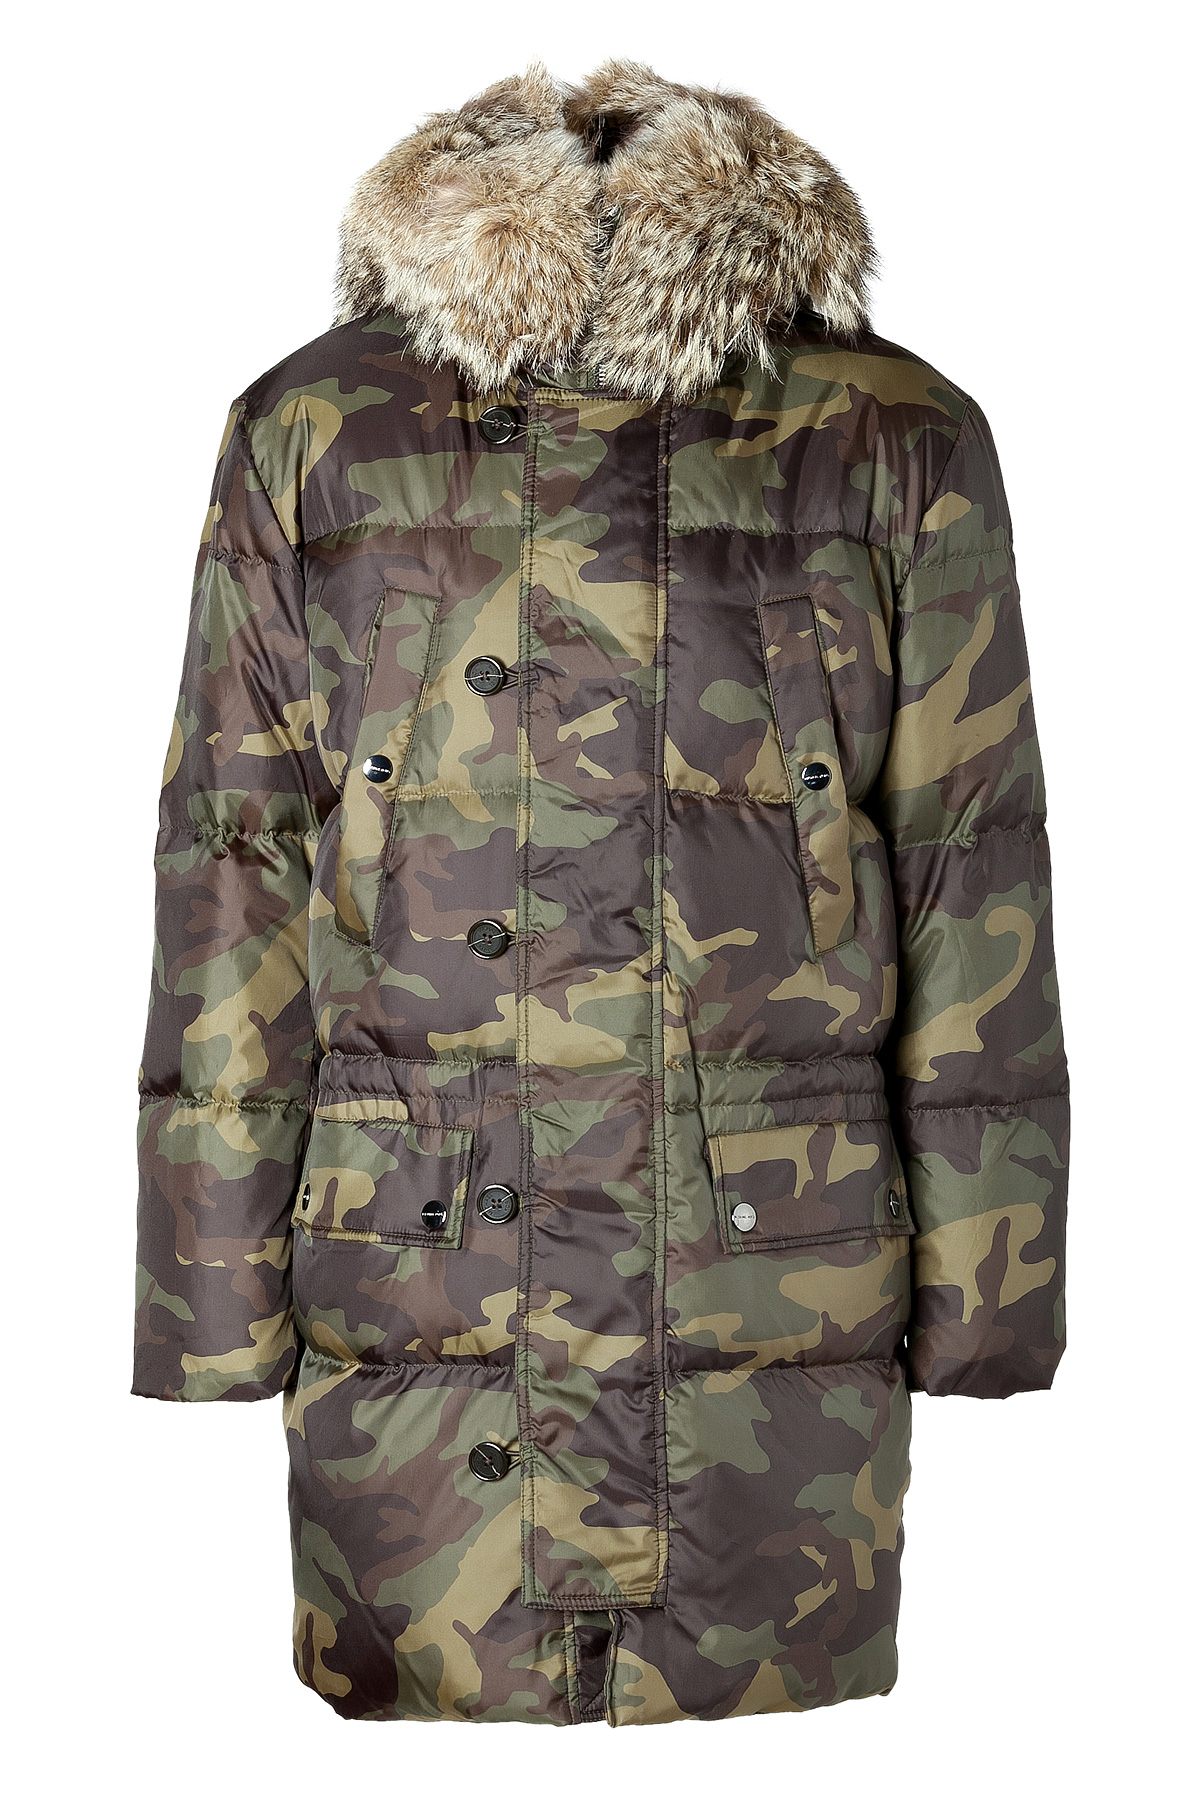 Michael Kors Camouflage Hooded Parka with Fur Collar in Green for Men ...